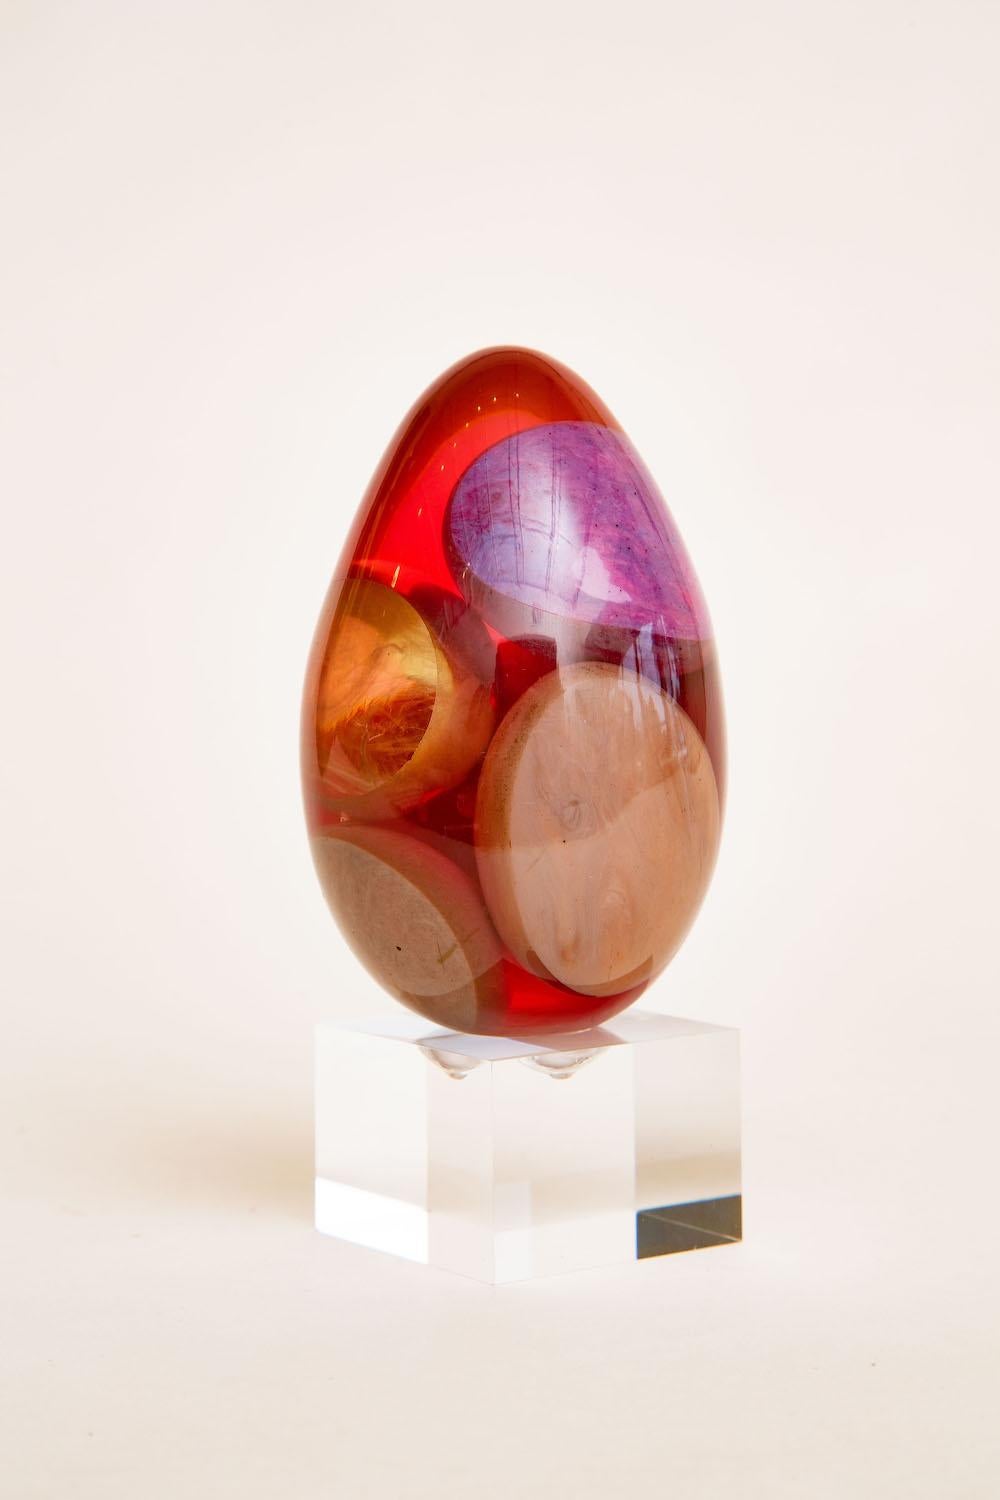 This wonderful unusual vintage small resin ovoid egg shaped sculpture has floating resin pieces inside in large shapes of the colors of purple, tan, gray, yellow and translucent inside the red resin. The red casts a color of magenta red. Each side